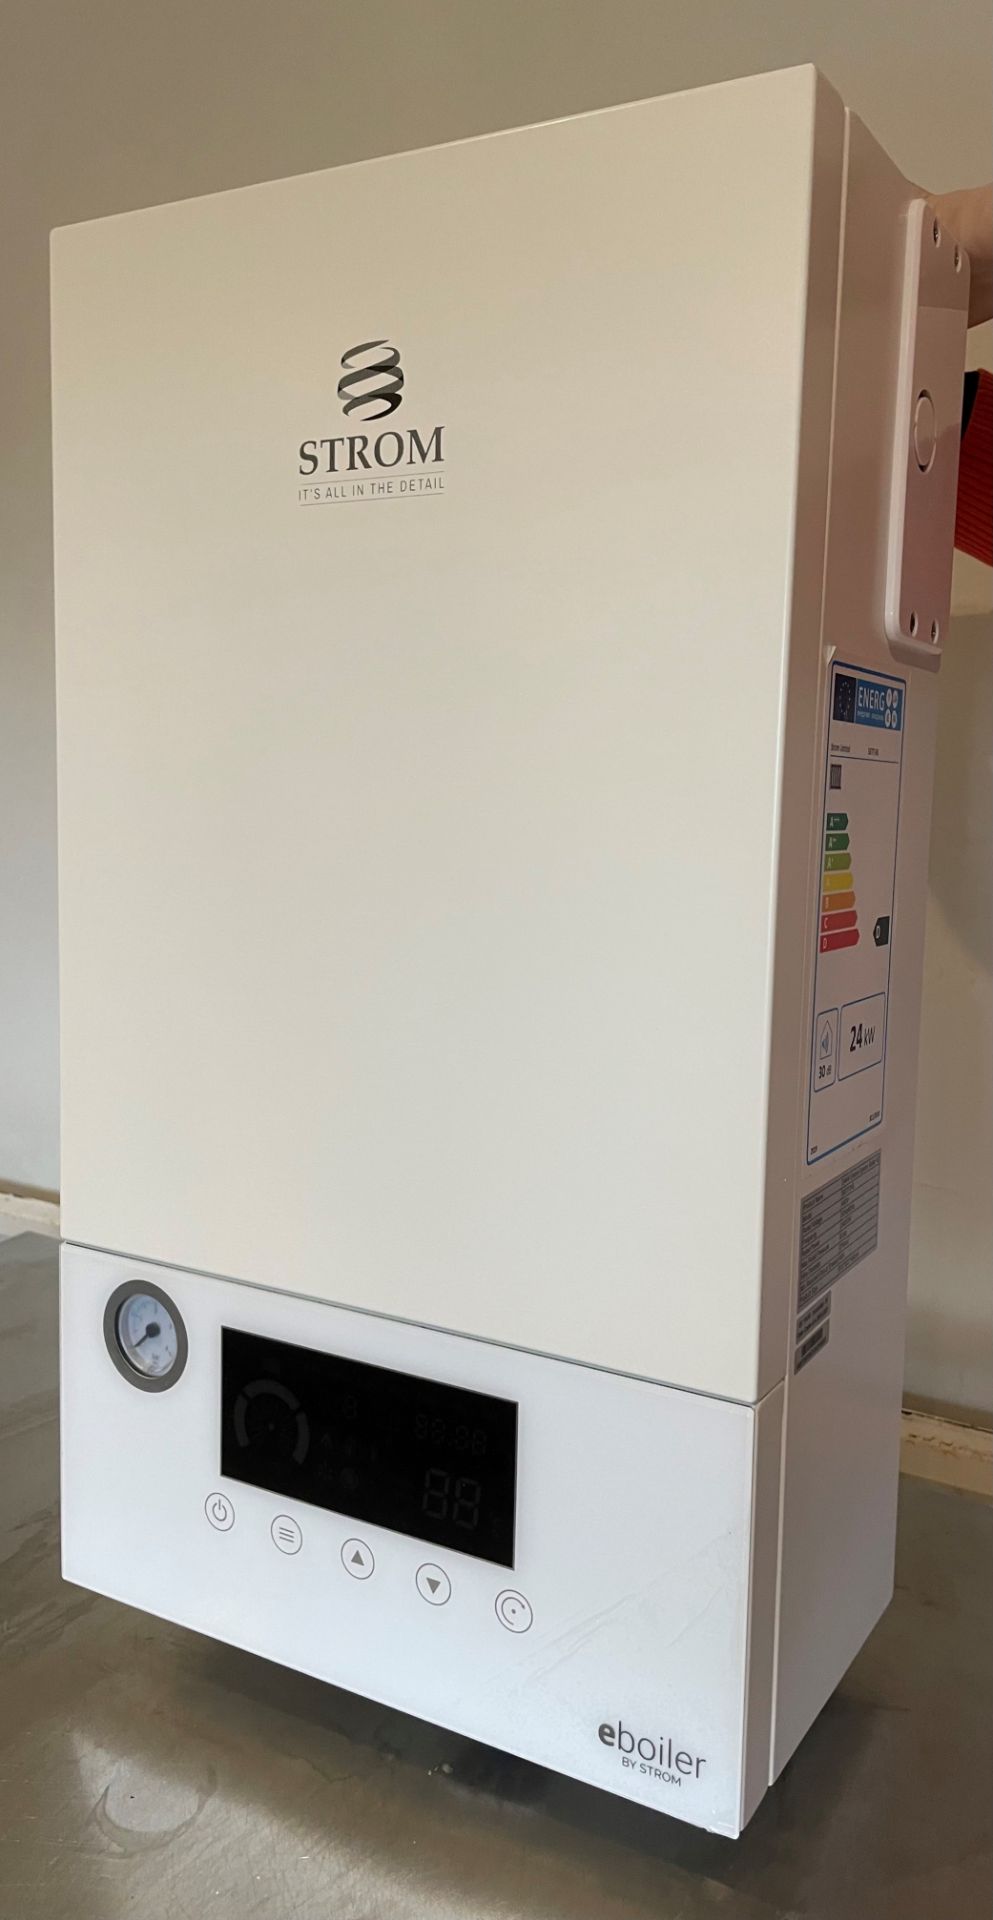 New Strom SBTP24S 3-Phase Electric System Boiler Compact and stylish boiler with quiet operation and - Image 7 of 13